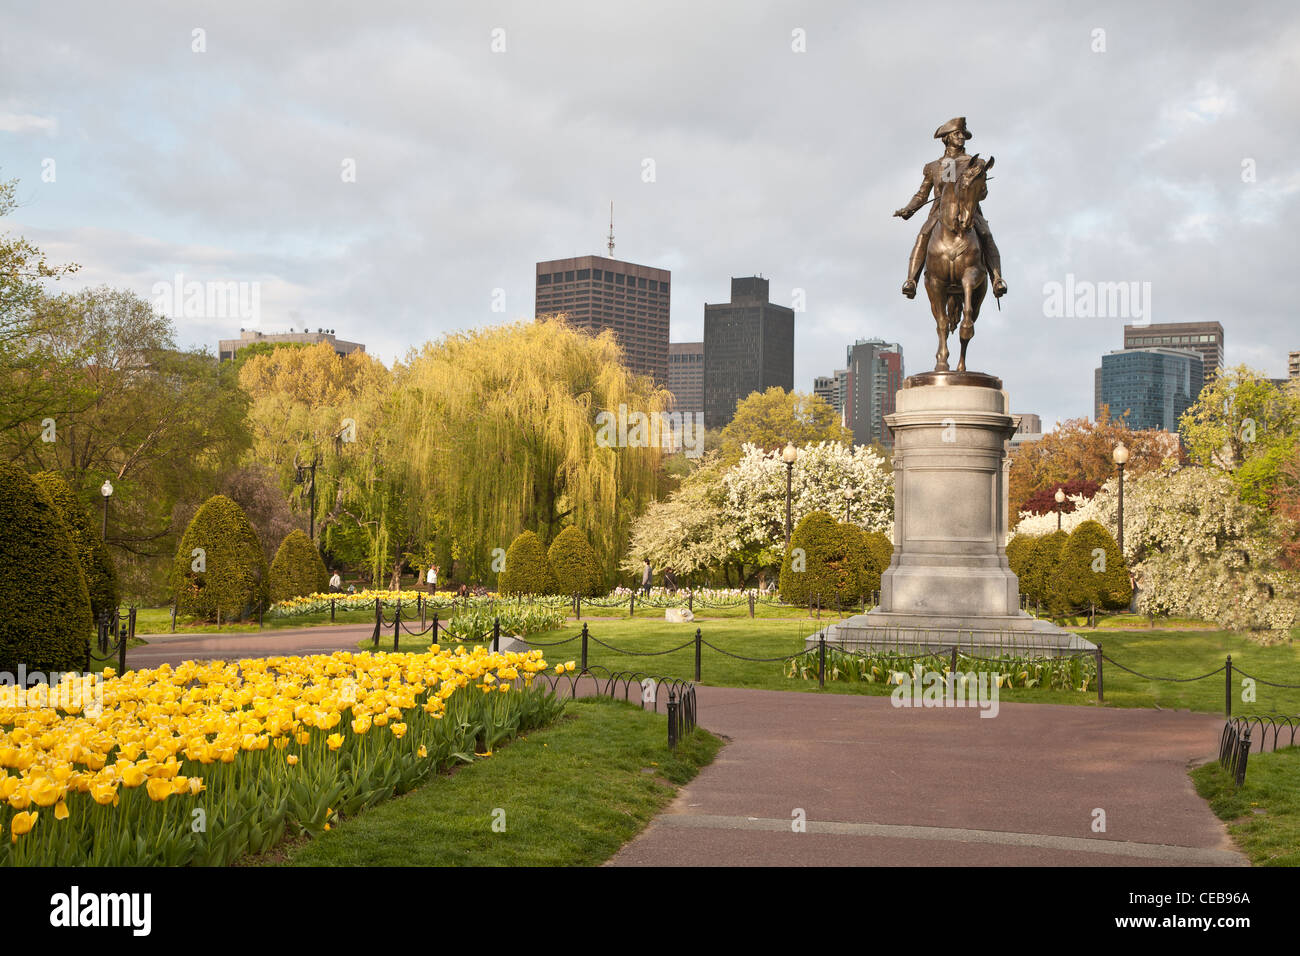 Boston Public Garden in spring with yellow tulips and statue of George Washington Stock Photo